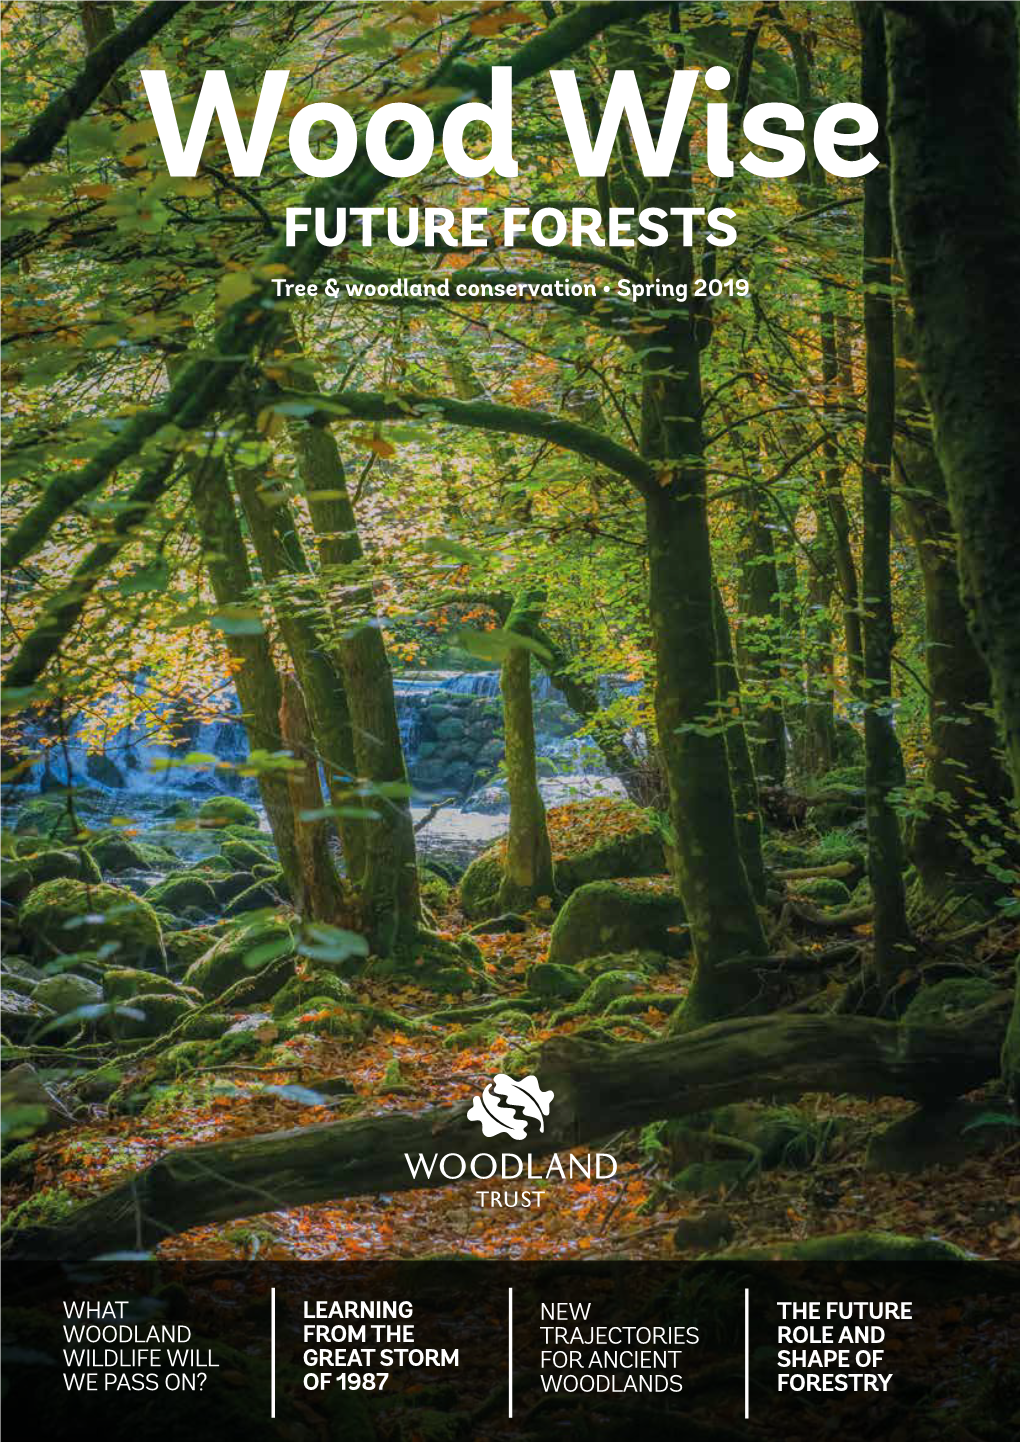 FUTURE FORESTS Tree & Woodland Conservation • Spring 2019